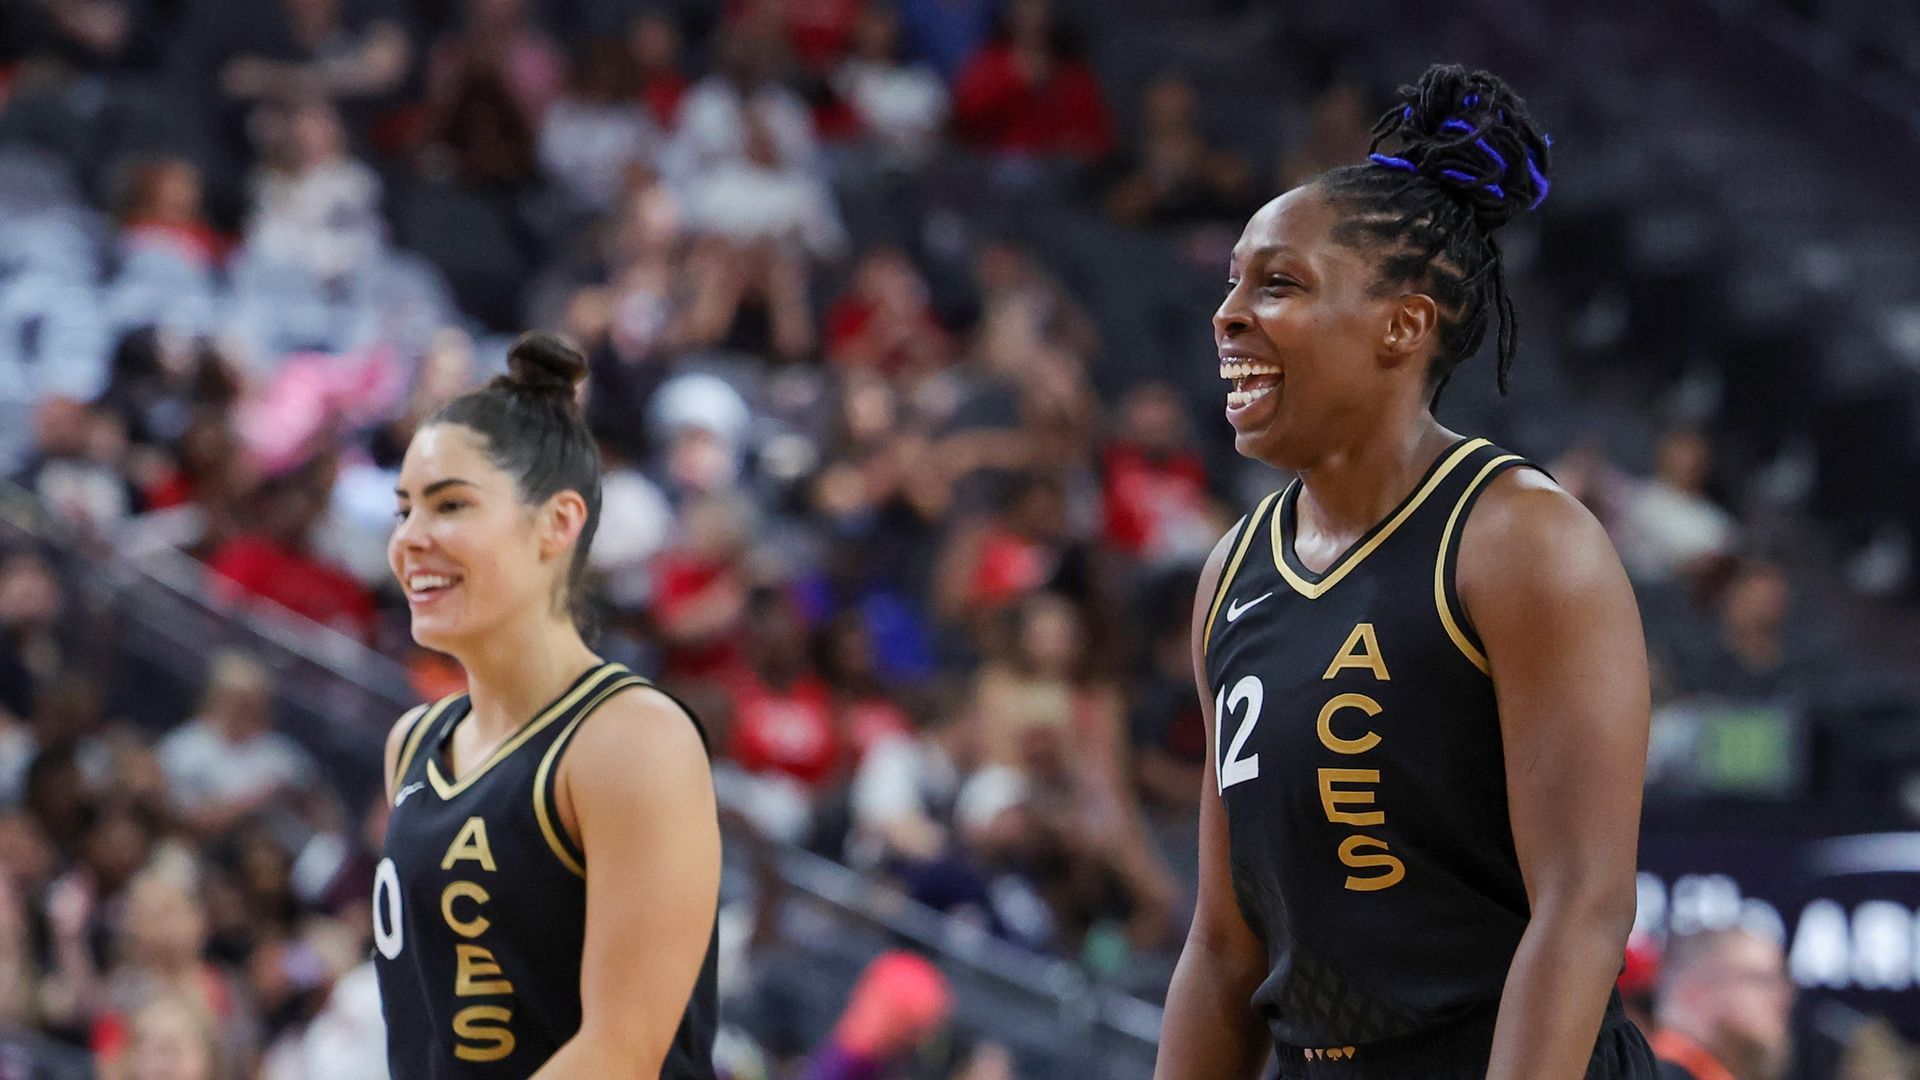 Two women in black basketball uniforms smiling next to each other